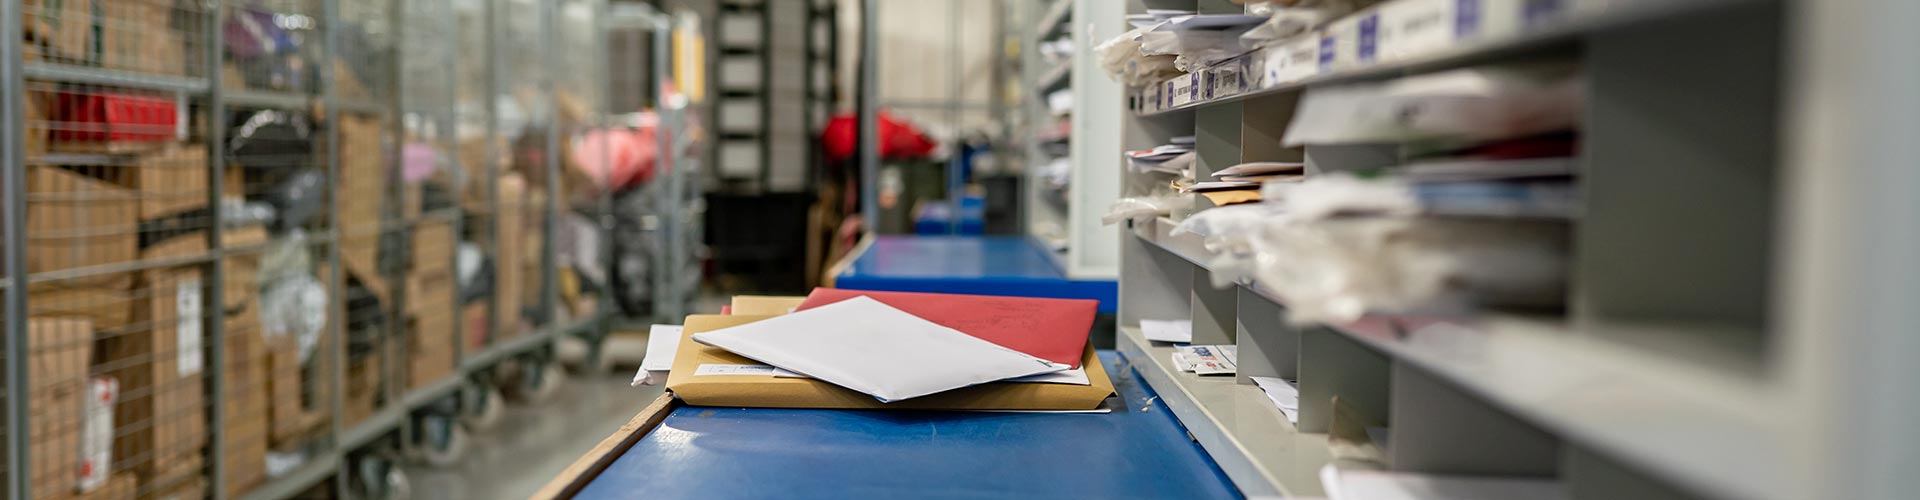 Direct Mailing Services by All Sorts UK Ltd